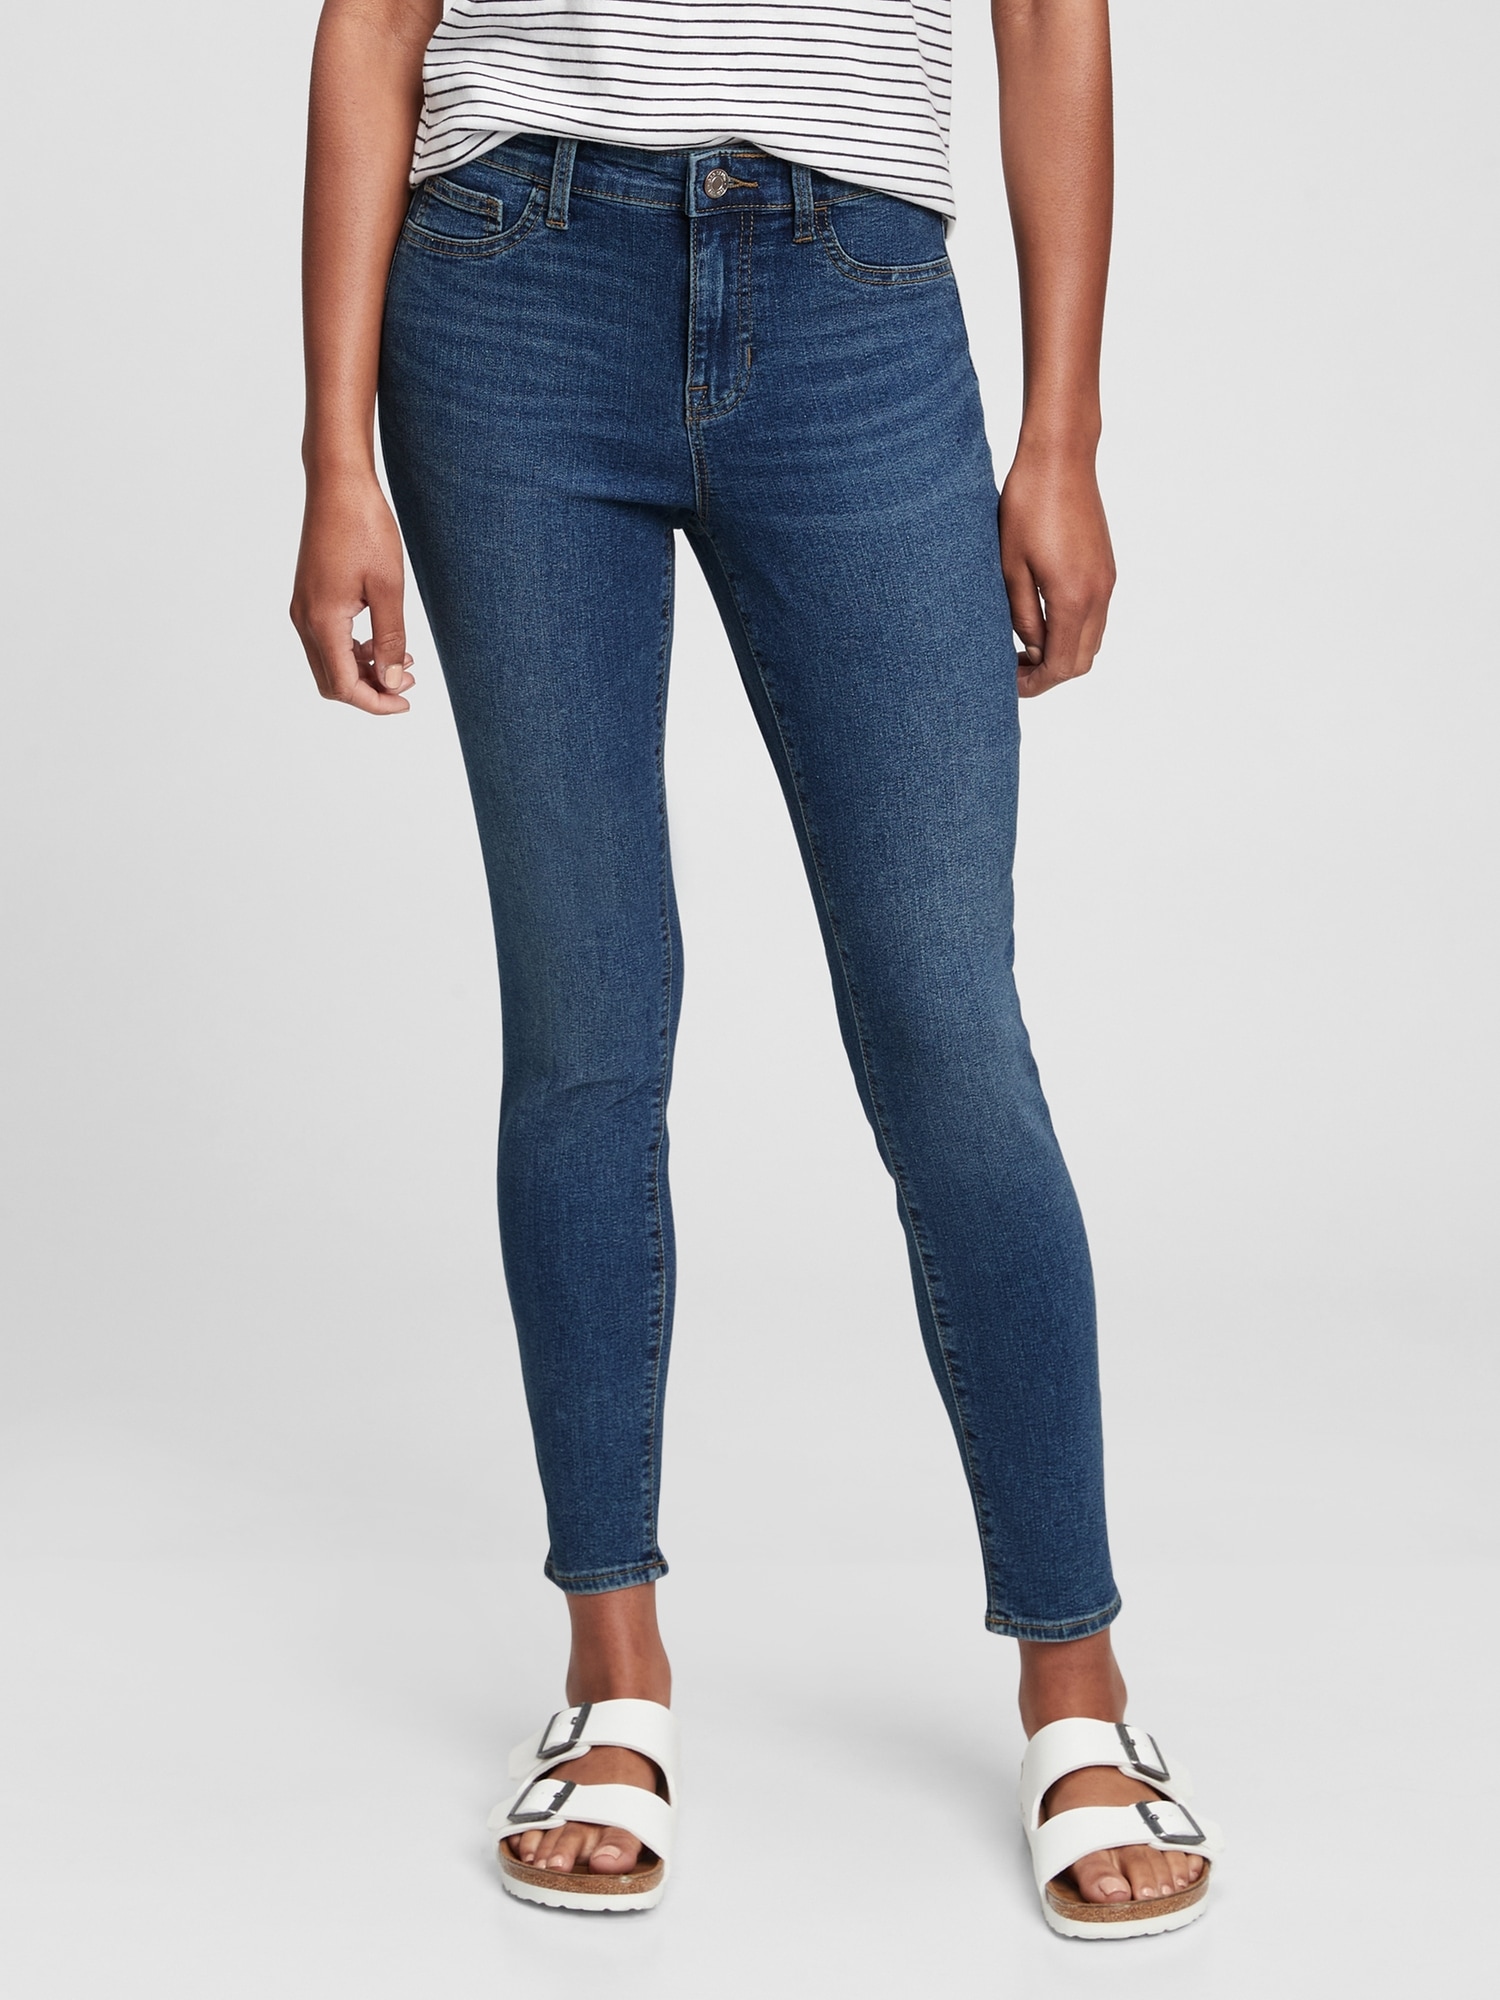 Ankle Jegging With Washwell | Gap Factory